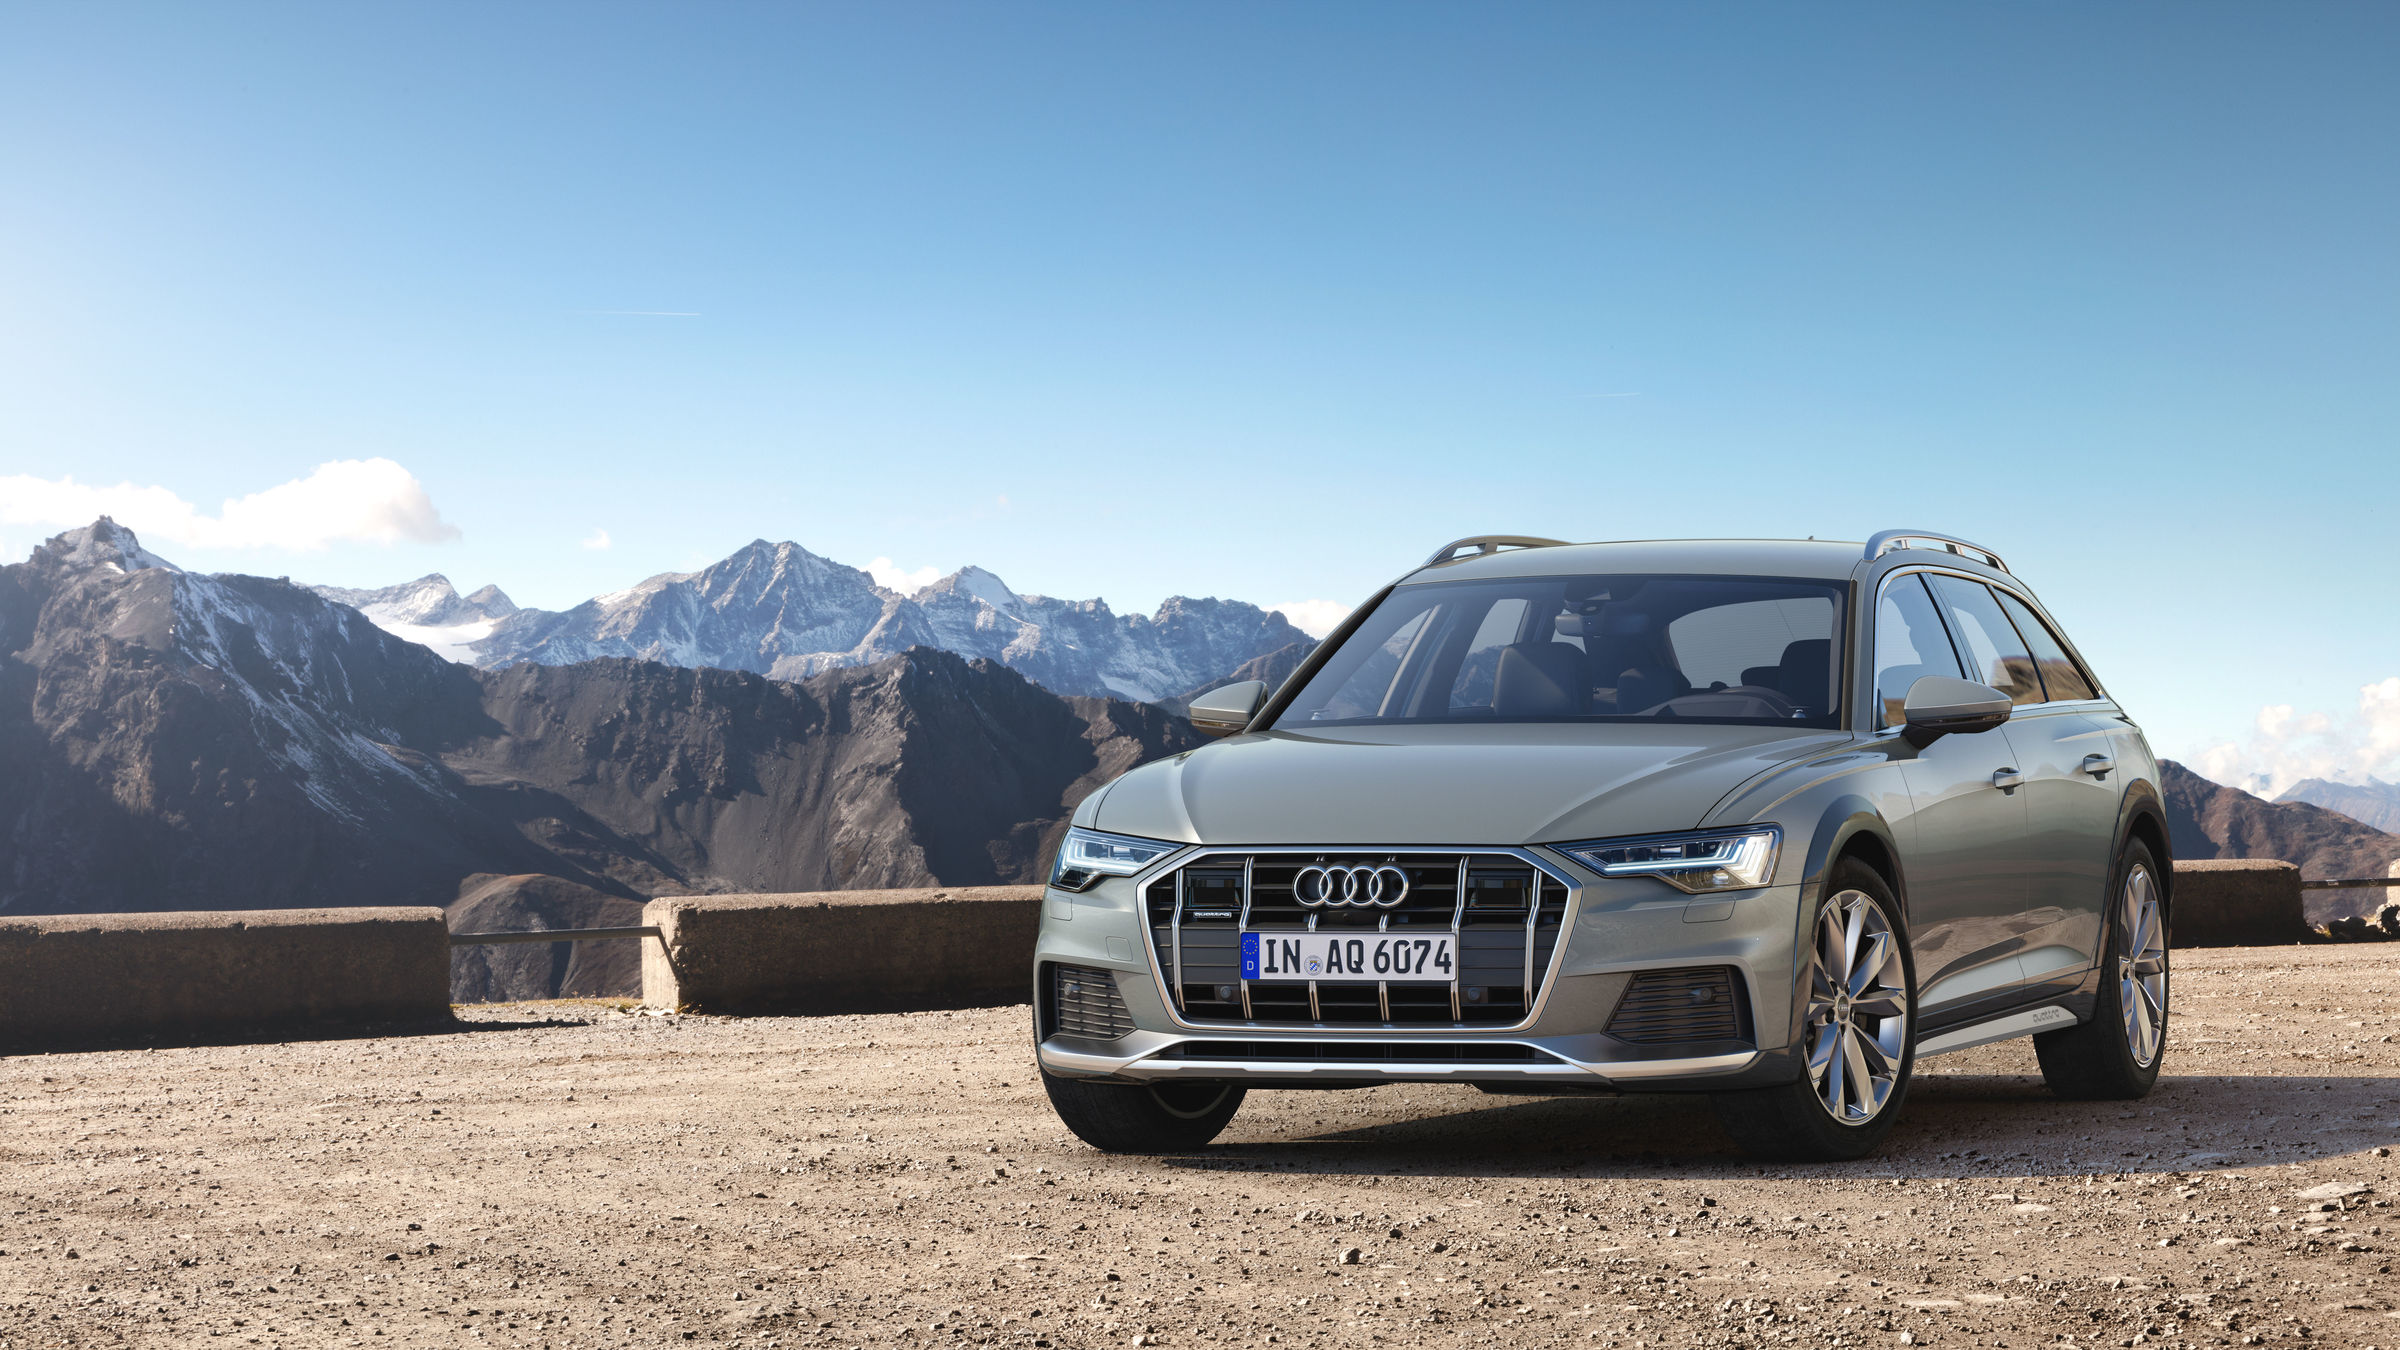 20 years of A6 Avant with offroad qualities: the new Audi A6 allroad quattro